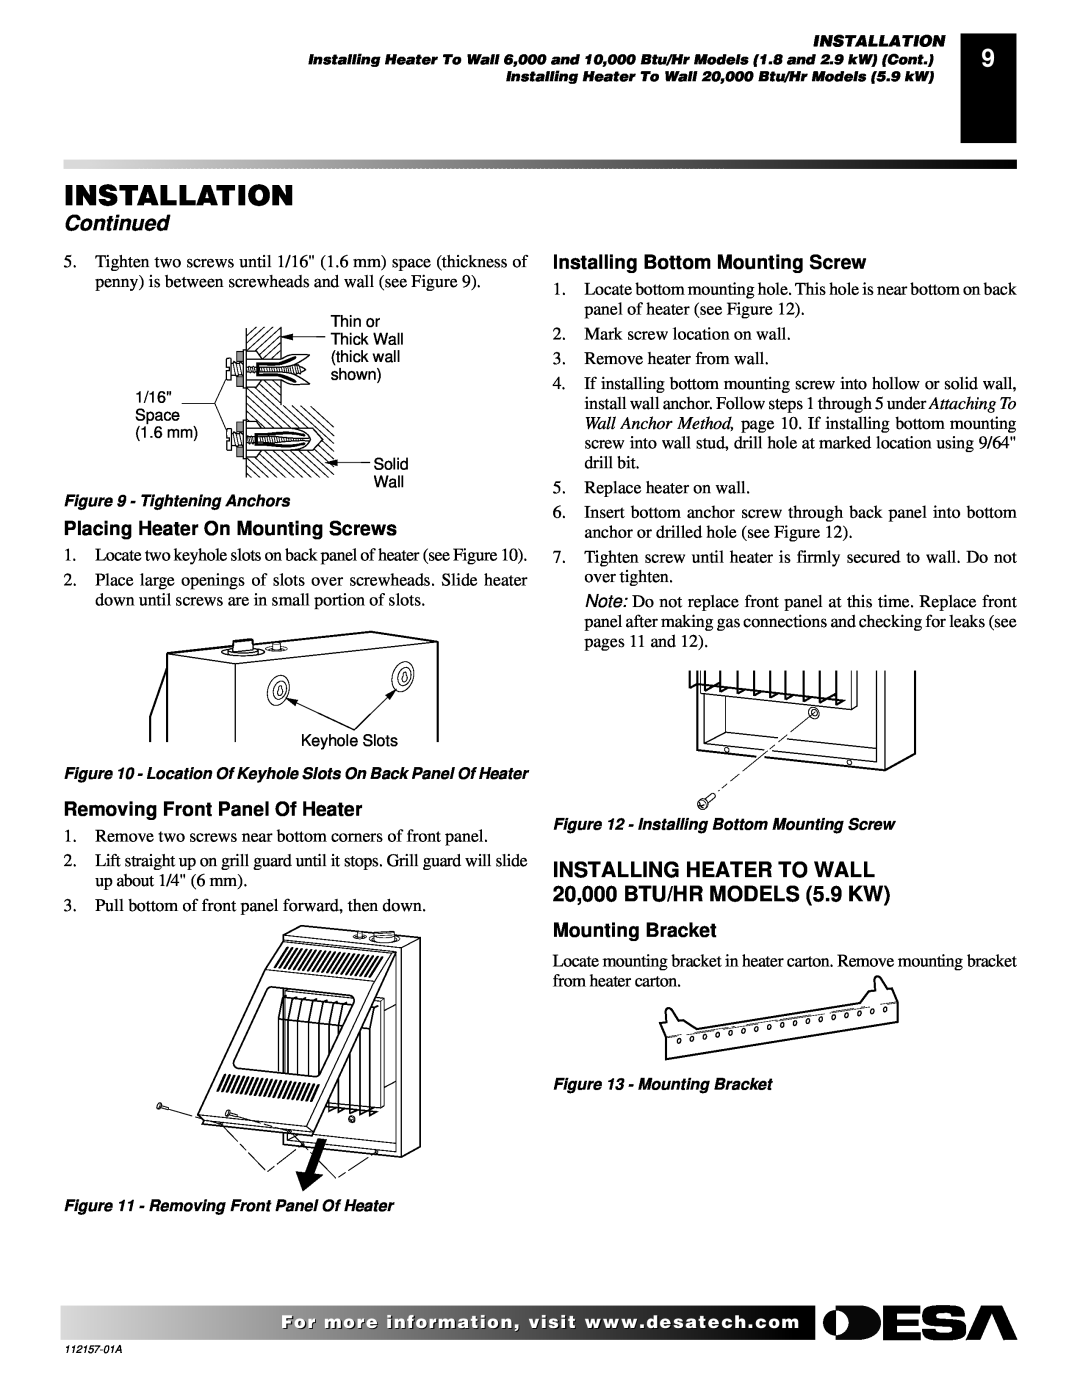 Desa GCP20T Placing Heater On Mounting Screws, Installing Bottom Mounting Screw, Removing Front Panel Of Heater, Continued 